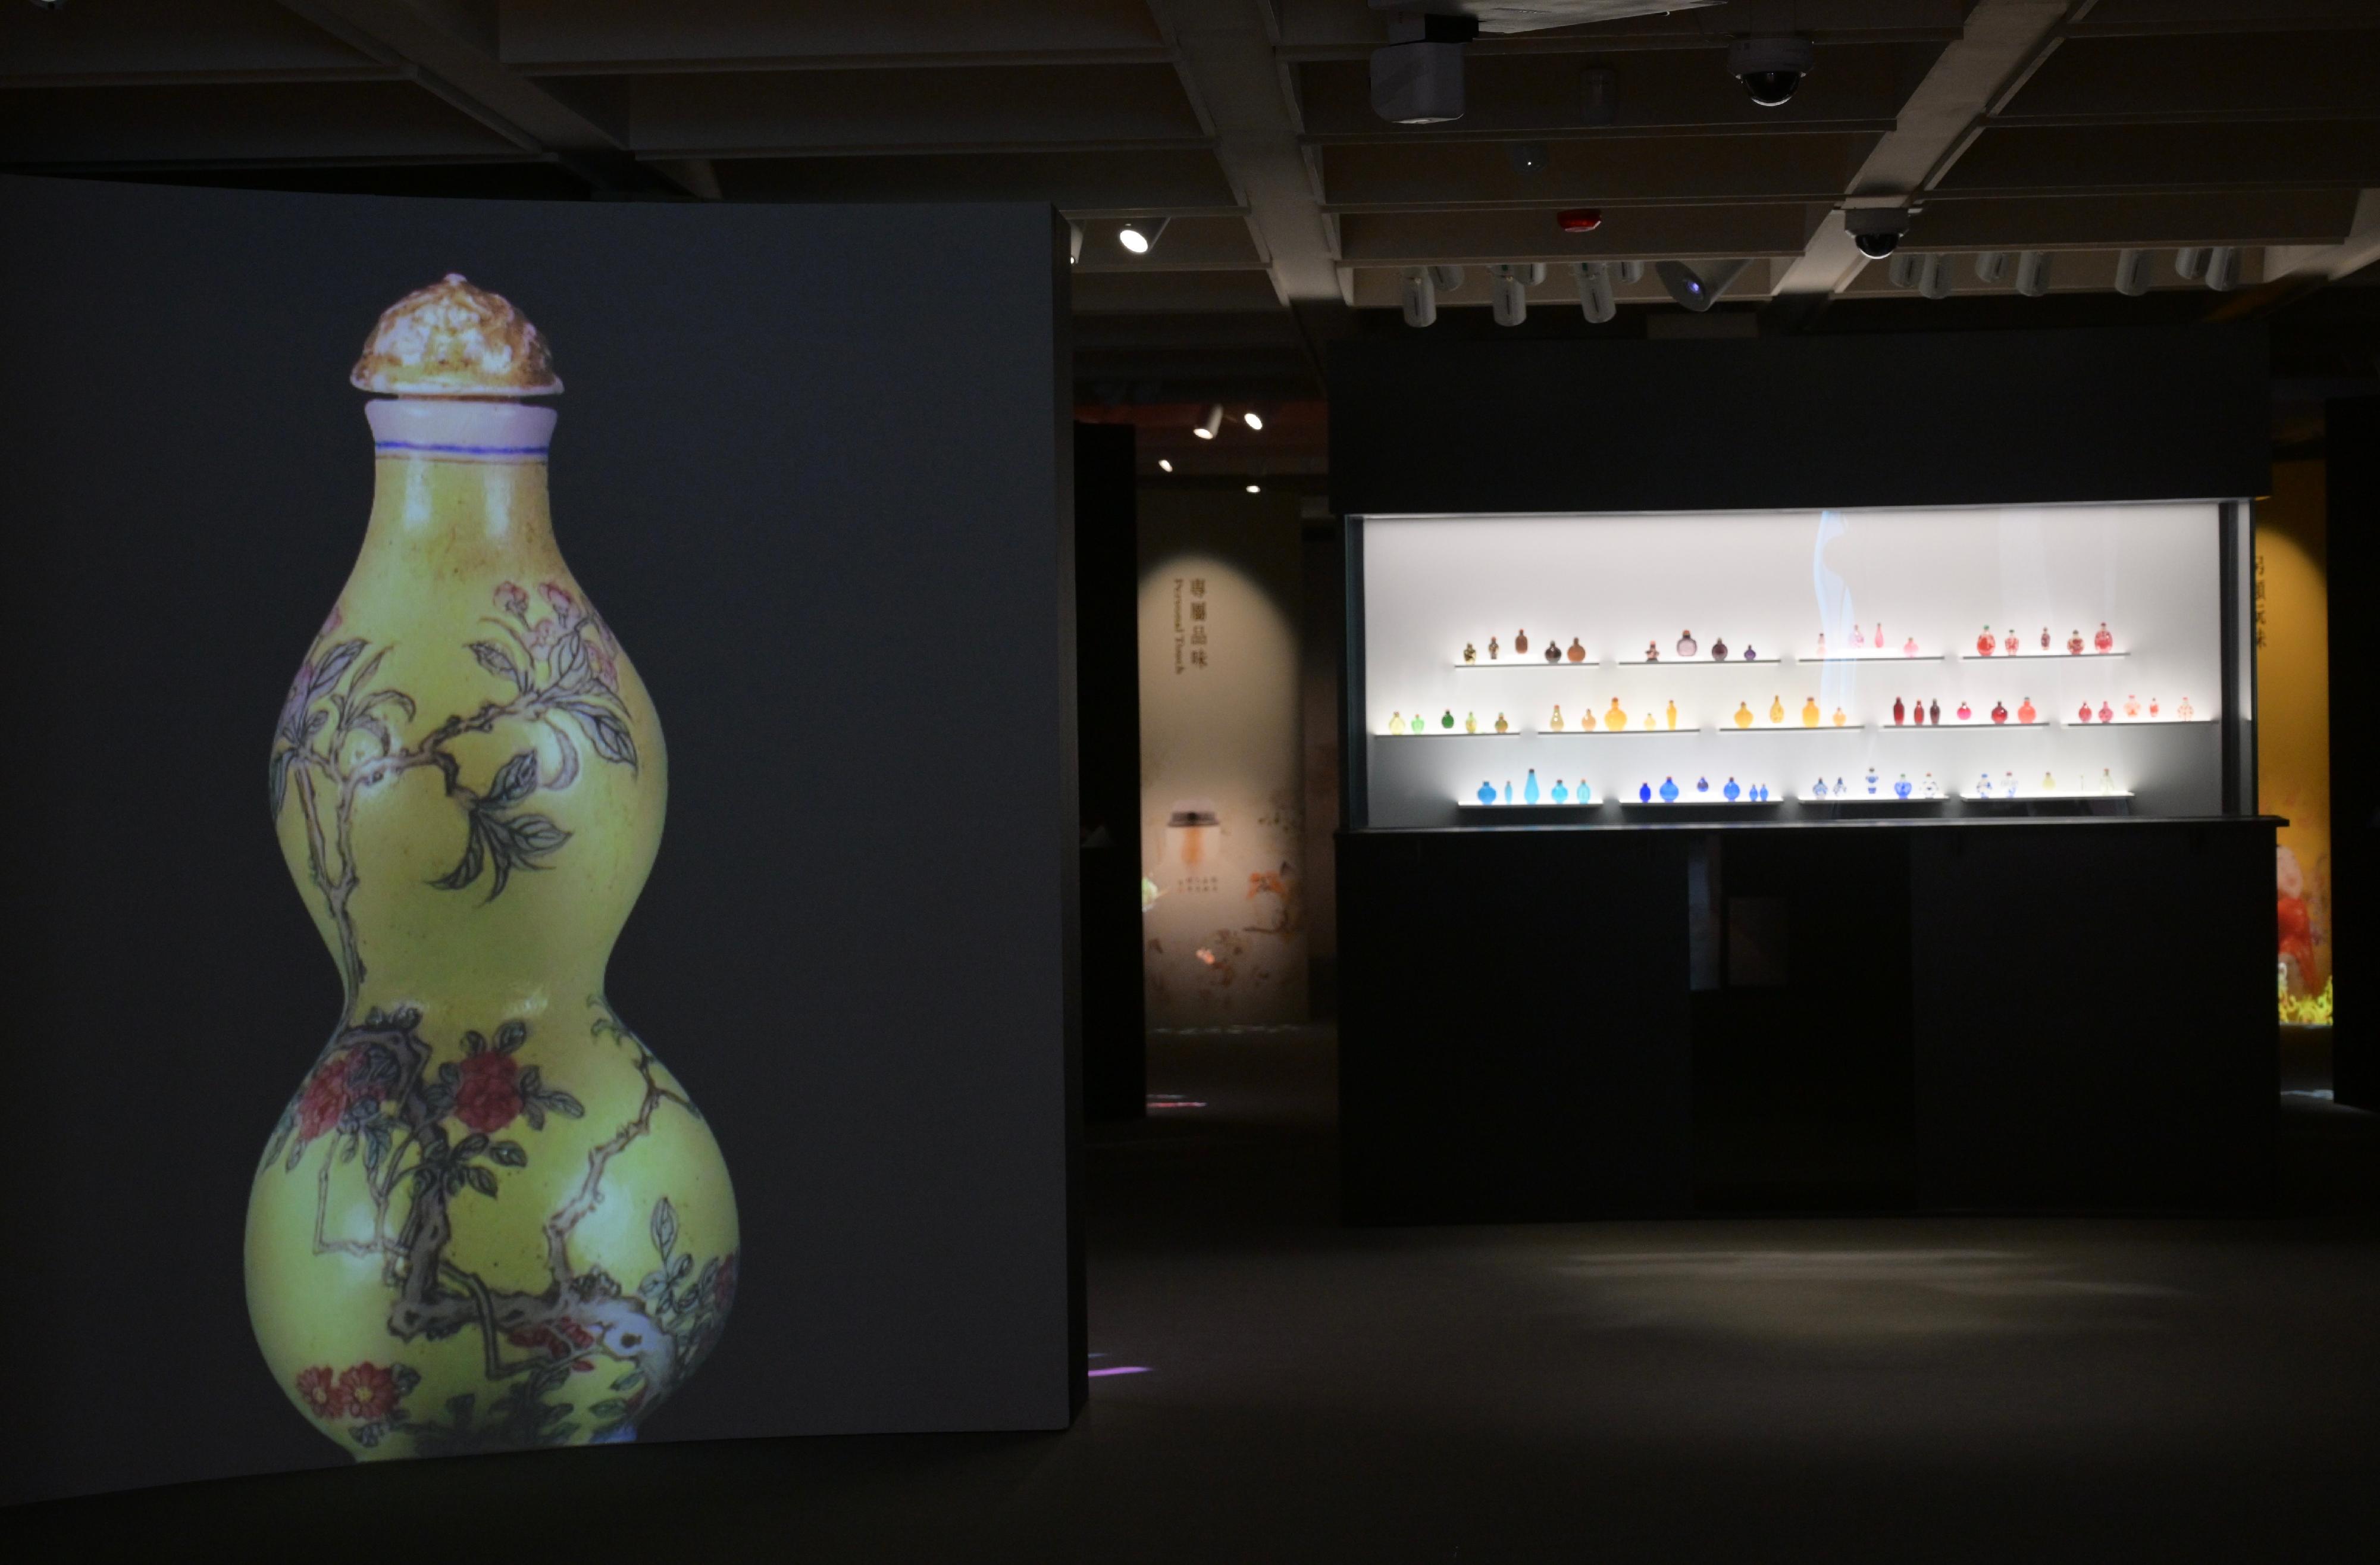 The opening ceremony of the "Art of Gifting: The Fuyun Xuan Collection of Chinese Snuff Bottles" exhibition and donation ceremony was held today (April 11) at the Hong Kong Museum of Art. Photo shows a large-scale projection in the exhibition that showcases the intricate details and exquisite artistry of the snuff bottles.